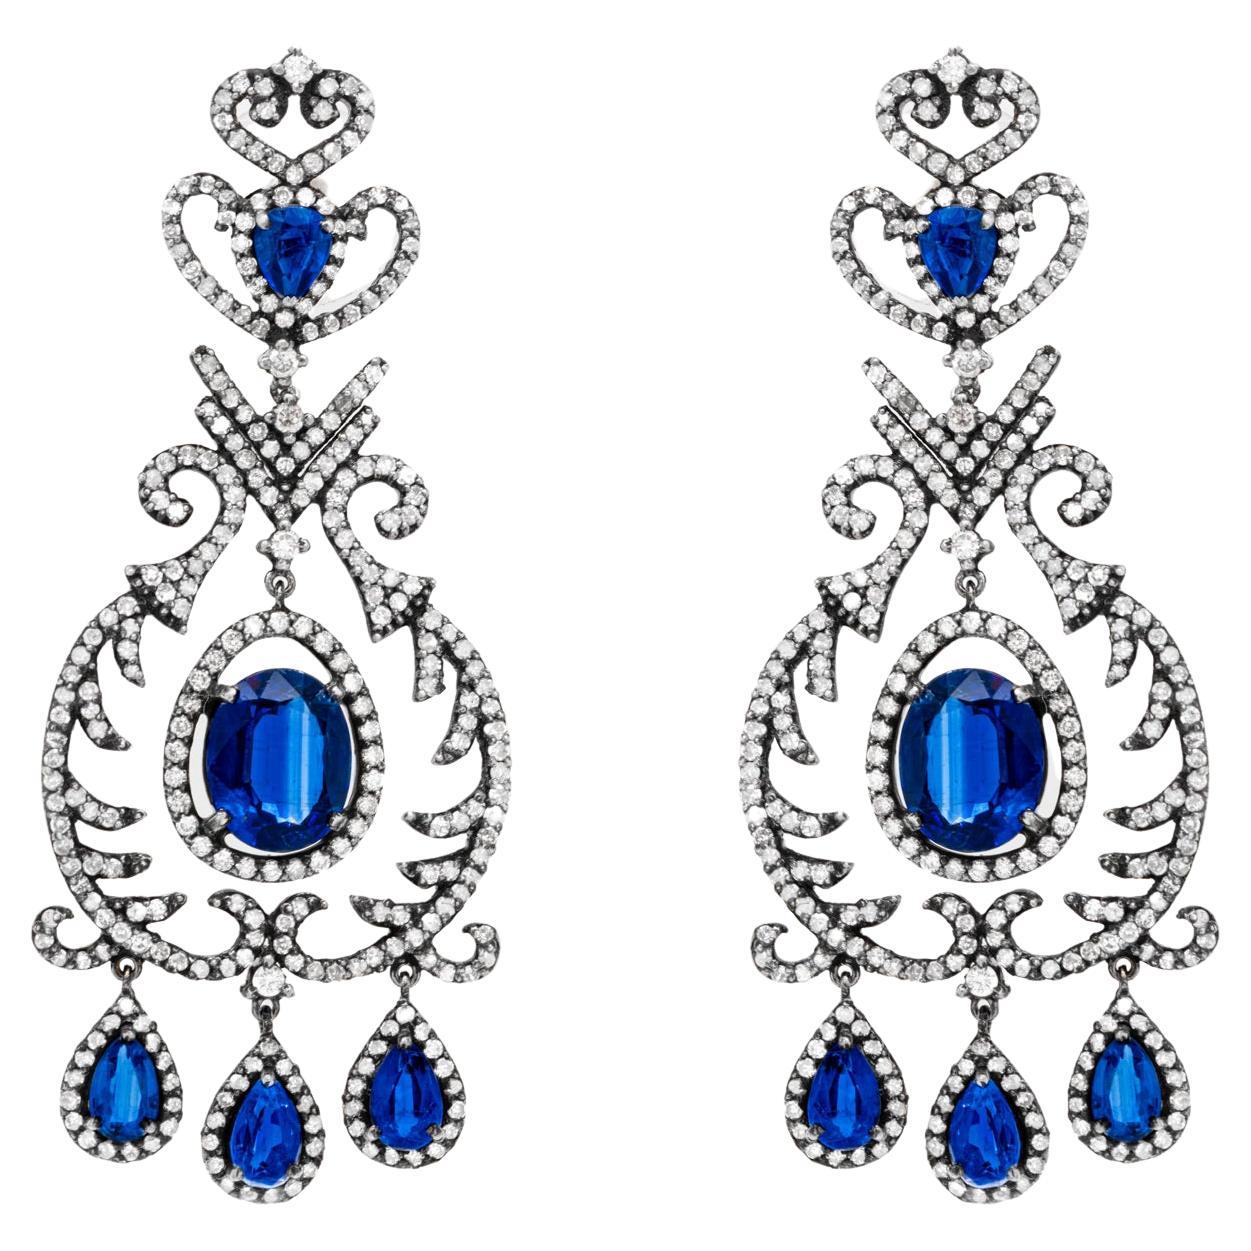 Kyanite Earrings 9.85 Carats with Diamonds 3.80 Carats Silver